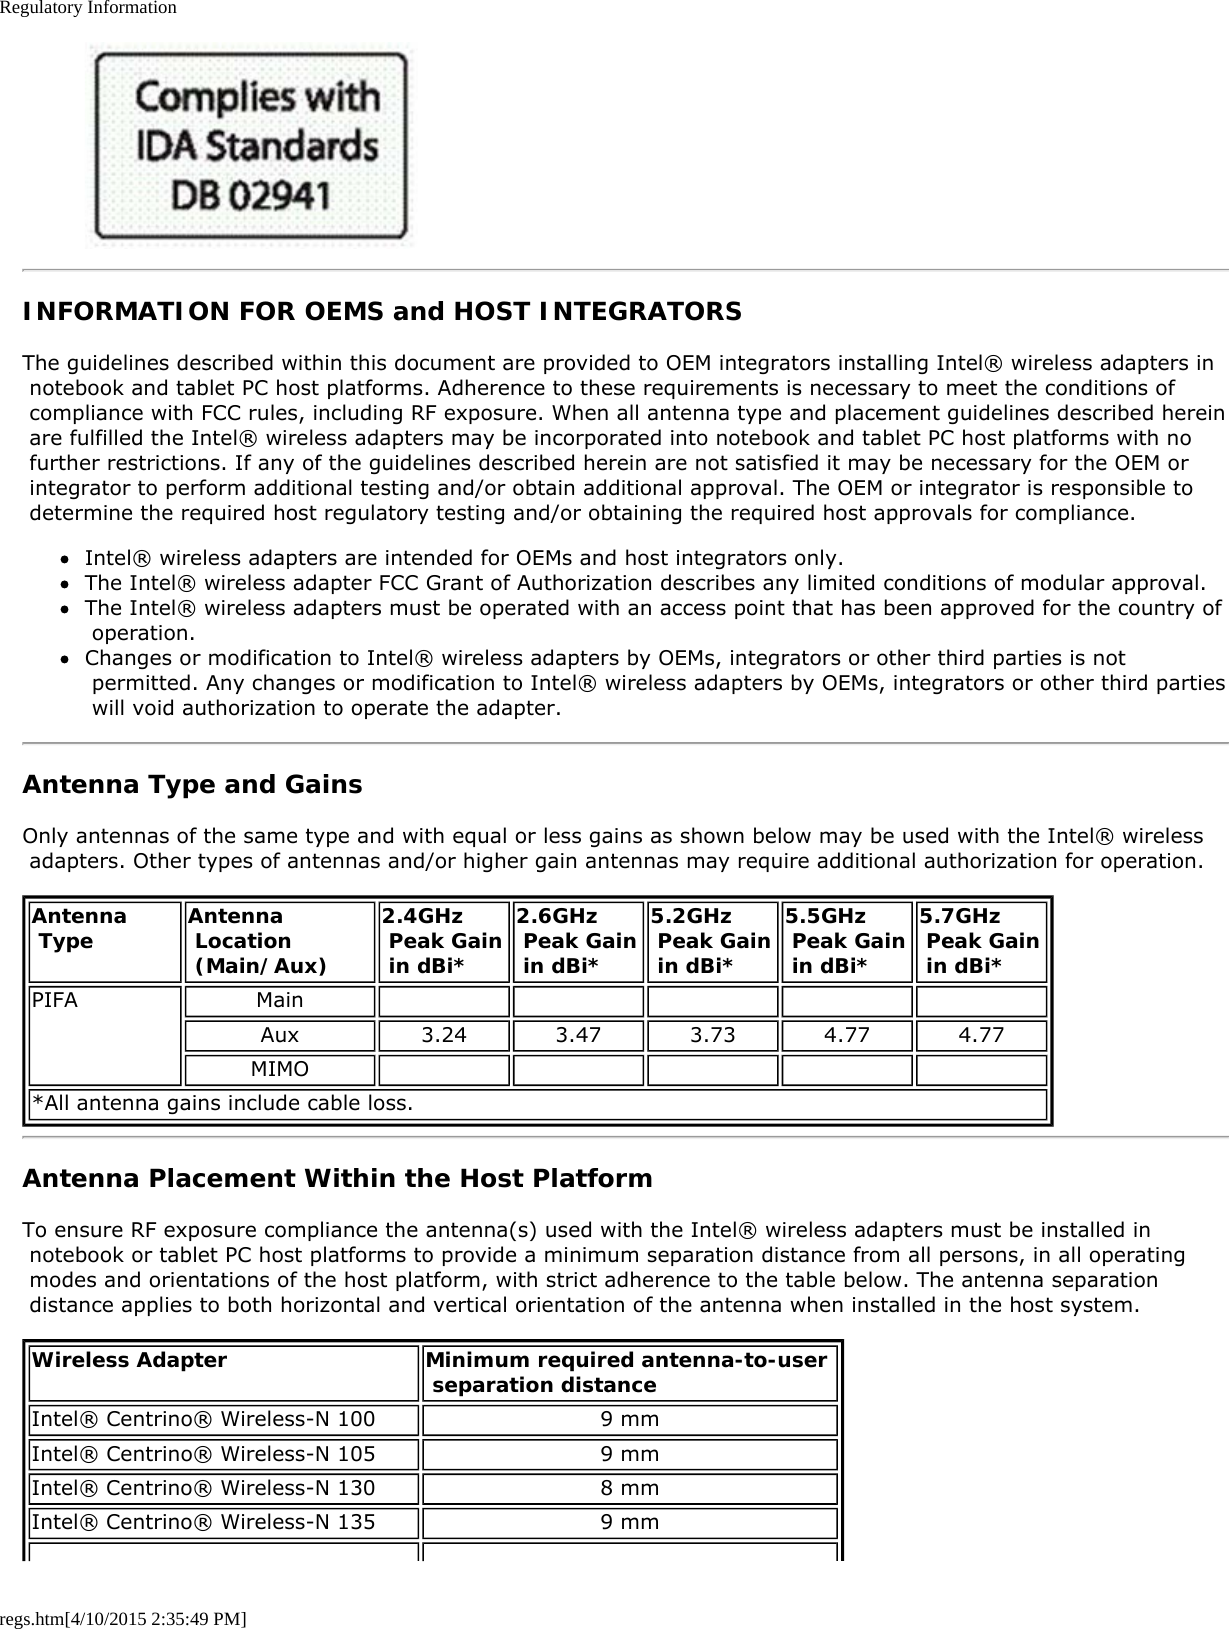 Regulatory Informationregs.htm[4/10/2015 2:35:49 PM]INFORMATION FOR OEMS and HOST INTEGRATORSThe guidelines described within this document are provided to OEM integrators installing Intel® wireless adapters in notebook and tablet PC host platforms. Adherence to these requirements is necessary to meet the conditions of compliance with FCC rules, including RF exposure. When all antenna type and placement guidelines described herein are fulfilled the Intel® wireless adapters may be incorporated into notebook and tablet PC host platforms with no further restrictions. If any of the guidelines described herein are not satisfied it may be necessary for the OEM or integrator to perform additional testing and/or obtain additional approval. The OEM or integrator is responsible to determine the required host regulatory testing and/or obtaining the required host approvals for compliance.Intel® wireless adapters are intended for OEMs and host integrators only.The Intel® wireless adapter FCC Grant of Authorization describes any limited conditions of modular approval.The Intel® wireless adapters must be operated with an access point that has been approved for the country of operation.Changes or modification to Intel® wireless adapters by OEMs, integrators or other third parties is not permitted. Any changes or modification to Intel® wireless adapters by OEMs, integrators or other third parties will void authorization to operate the adapter.Antenna Type and GainsOnly antennas of the same type and with equal or less gains as shown below may be used with the Intel® wireless adapters. Other types of antennas and/or higher gain antennas may require additional authorization for operation.Antenna Type Antenna Location (Main/Aux)2.4GHz Peak Gain in dBi*2.6GHz Peak Gain in dBi*5.2GHz Peak Gain in dBi*5.5GHz Peak Gain in dBi*5.7GHz  Peak Gain in dBi*PIFA MainAux 3.24 3.47 3.73 4.77 4.77MIMO*All antenna gains include cable loss.Antenna Placement Within the Host PlatformTo ensure RF exposure compliance the antenna(s) used with the Intel® wireless adapters must be installed in notebook or tablet PC host platforms to provide a minimum separation distance from all persons, in all operating modes and orientations of the host platform, with strict adherence to the table below. The antenna separation distance applies to both horizontal and vertical orientation of the antenna when installed in the host system.Wireless Adapter Minimum required antenna-to-user  separation distanceIntel® Centrino® Wireless-N 100 9 mmIntel® Centrino® Wireless-N 105 9 mmIntel® Centrino® Wireless-N 130 8 mmIntel® Centrino® Wireless-N 135 9 mm